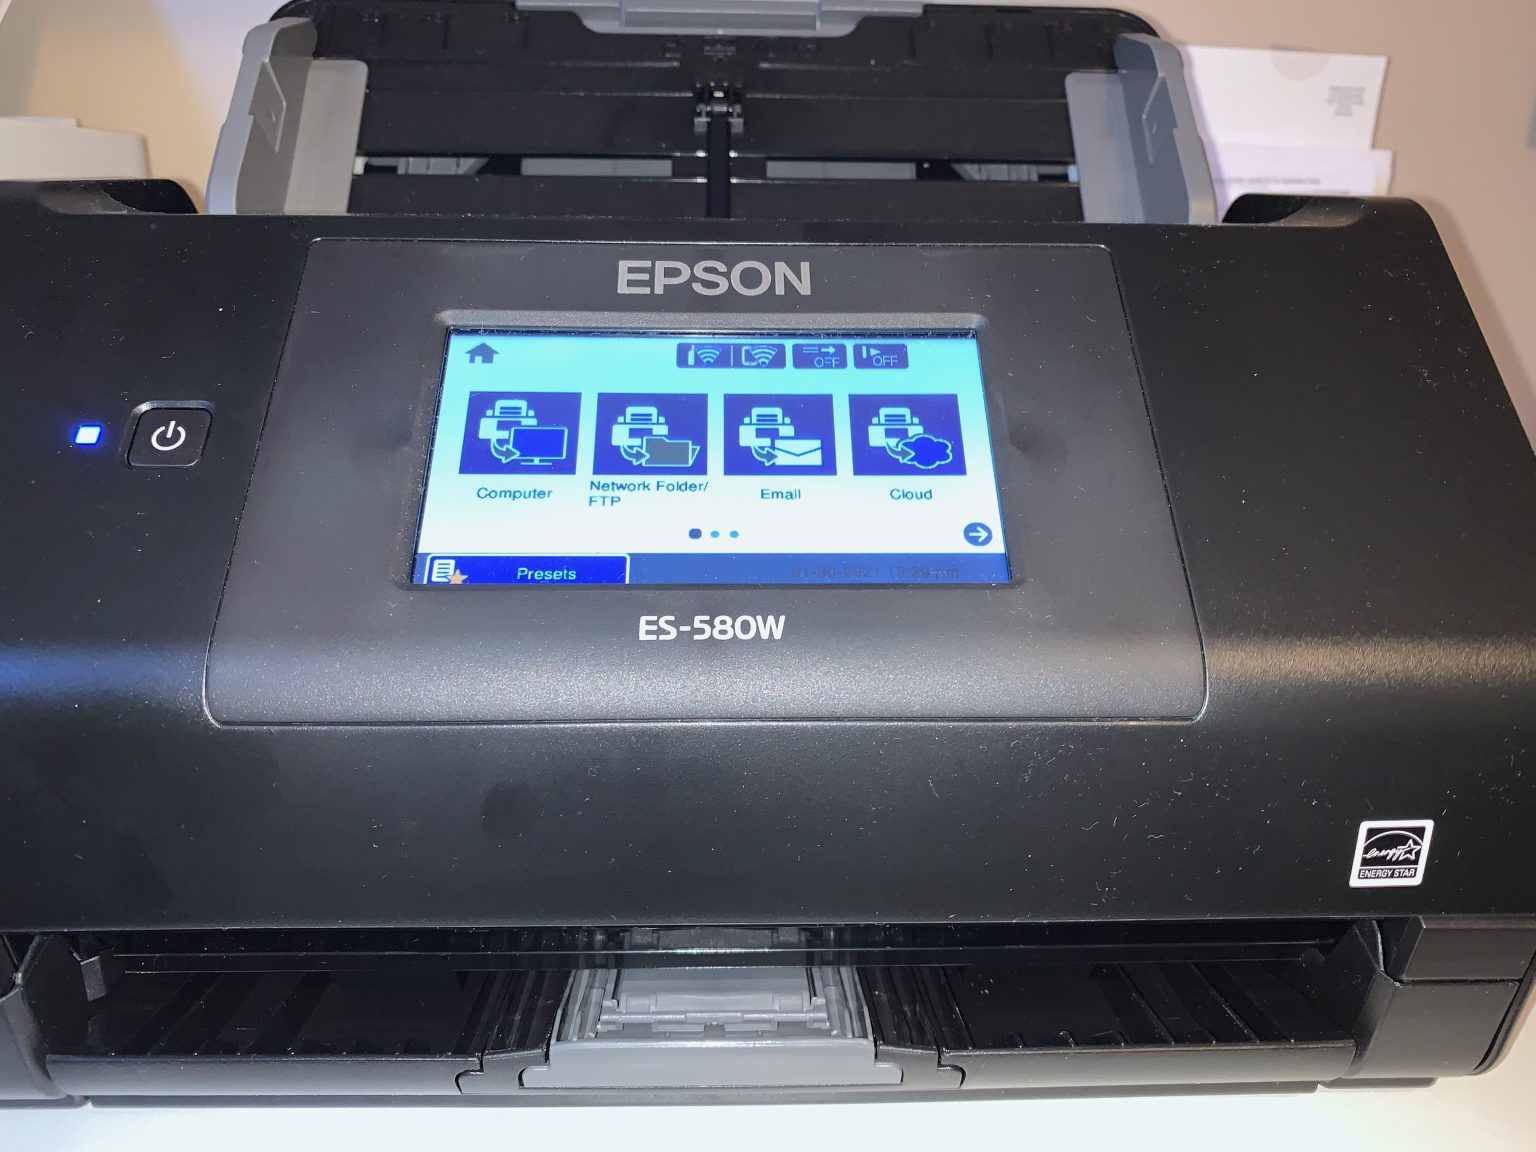 epson scan to cloud multiple